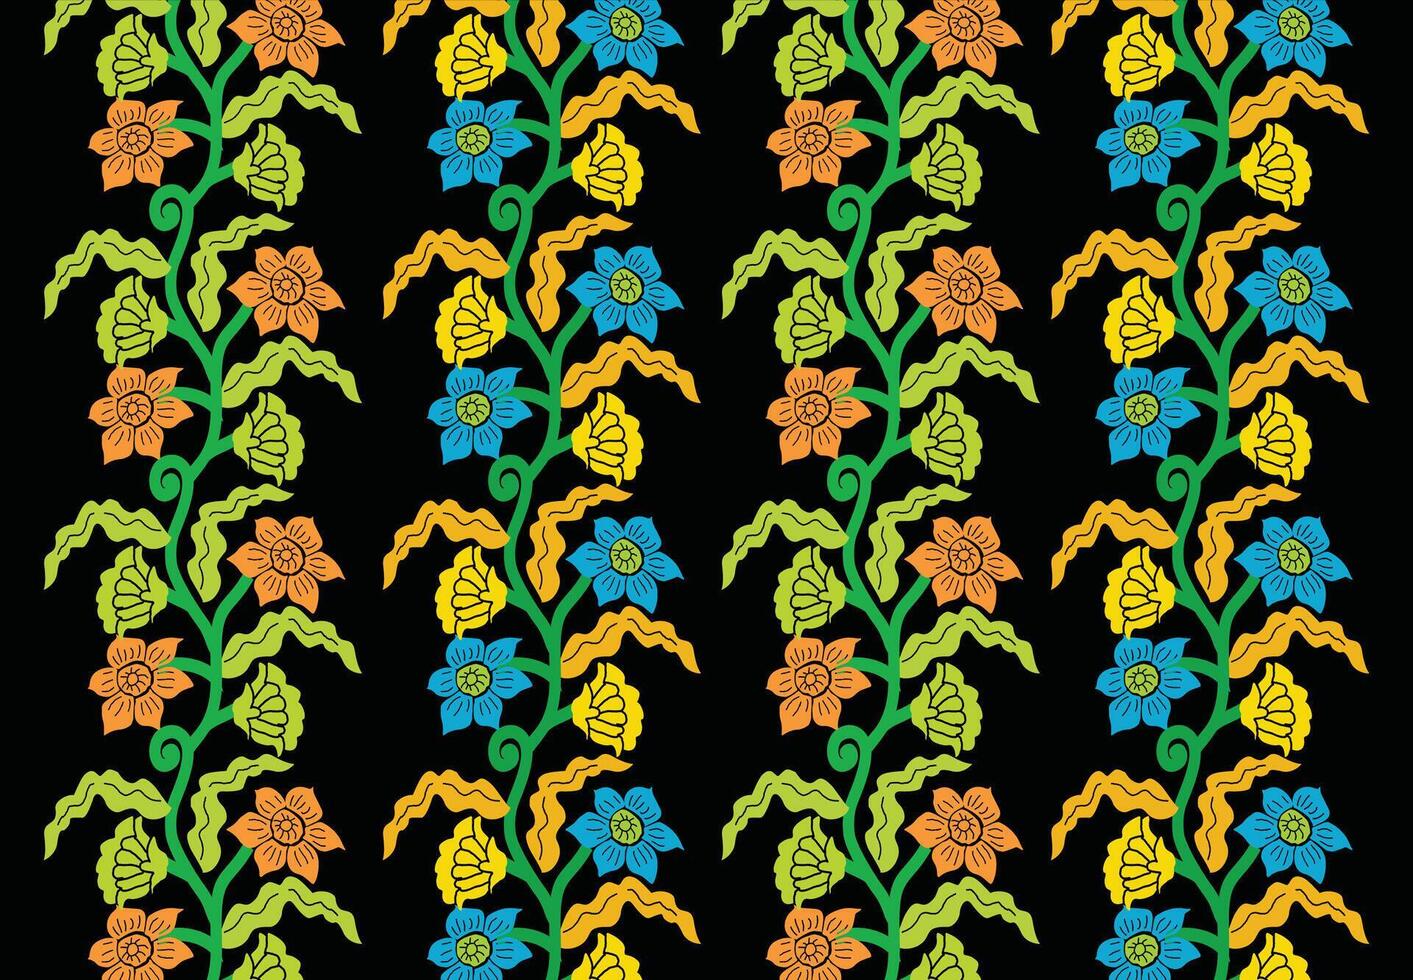 PrintIndonesian batik motifs with exclusive and classic Balinese style floral and plant patterns are suitable for various purposes. EPS 10 vector